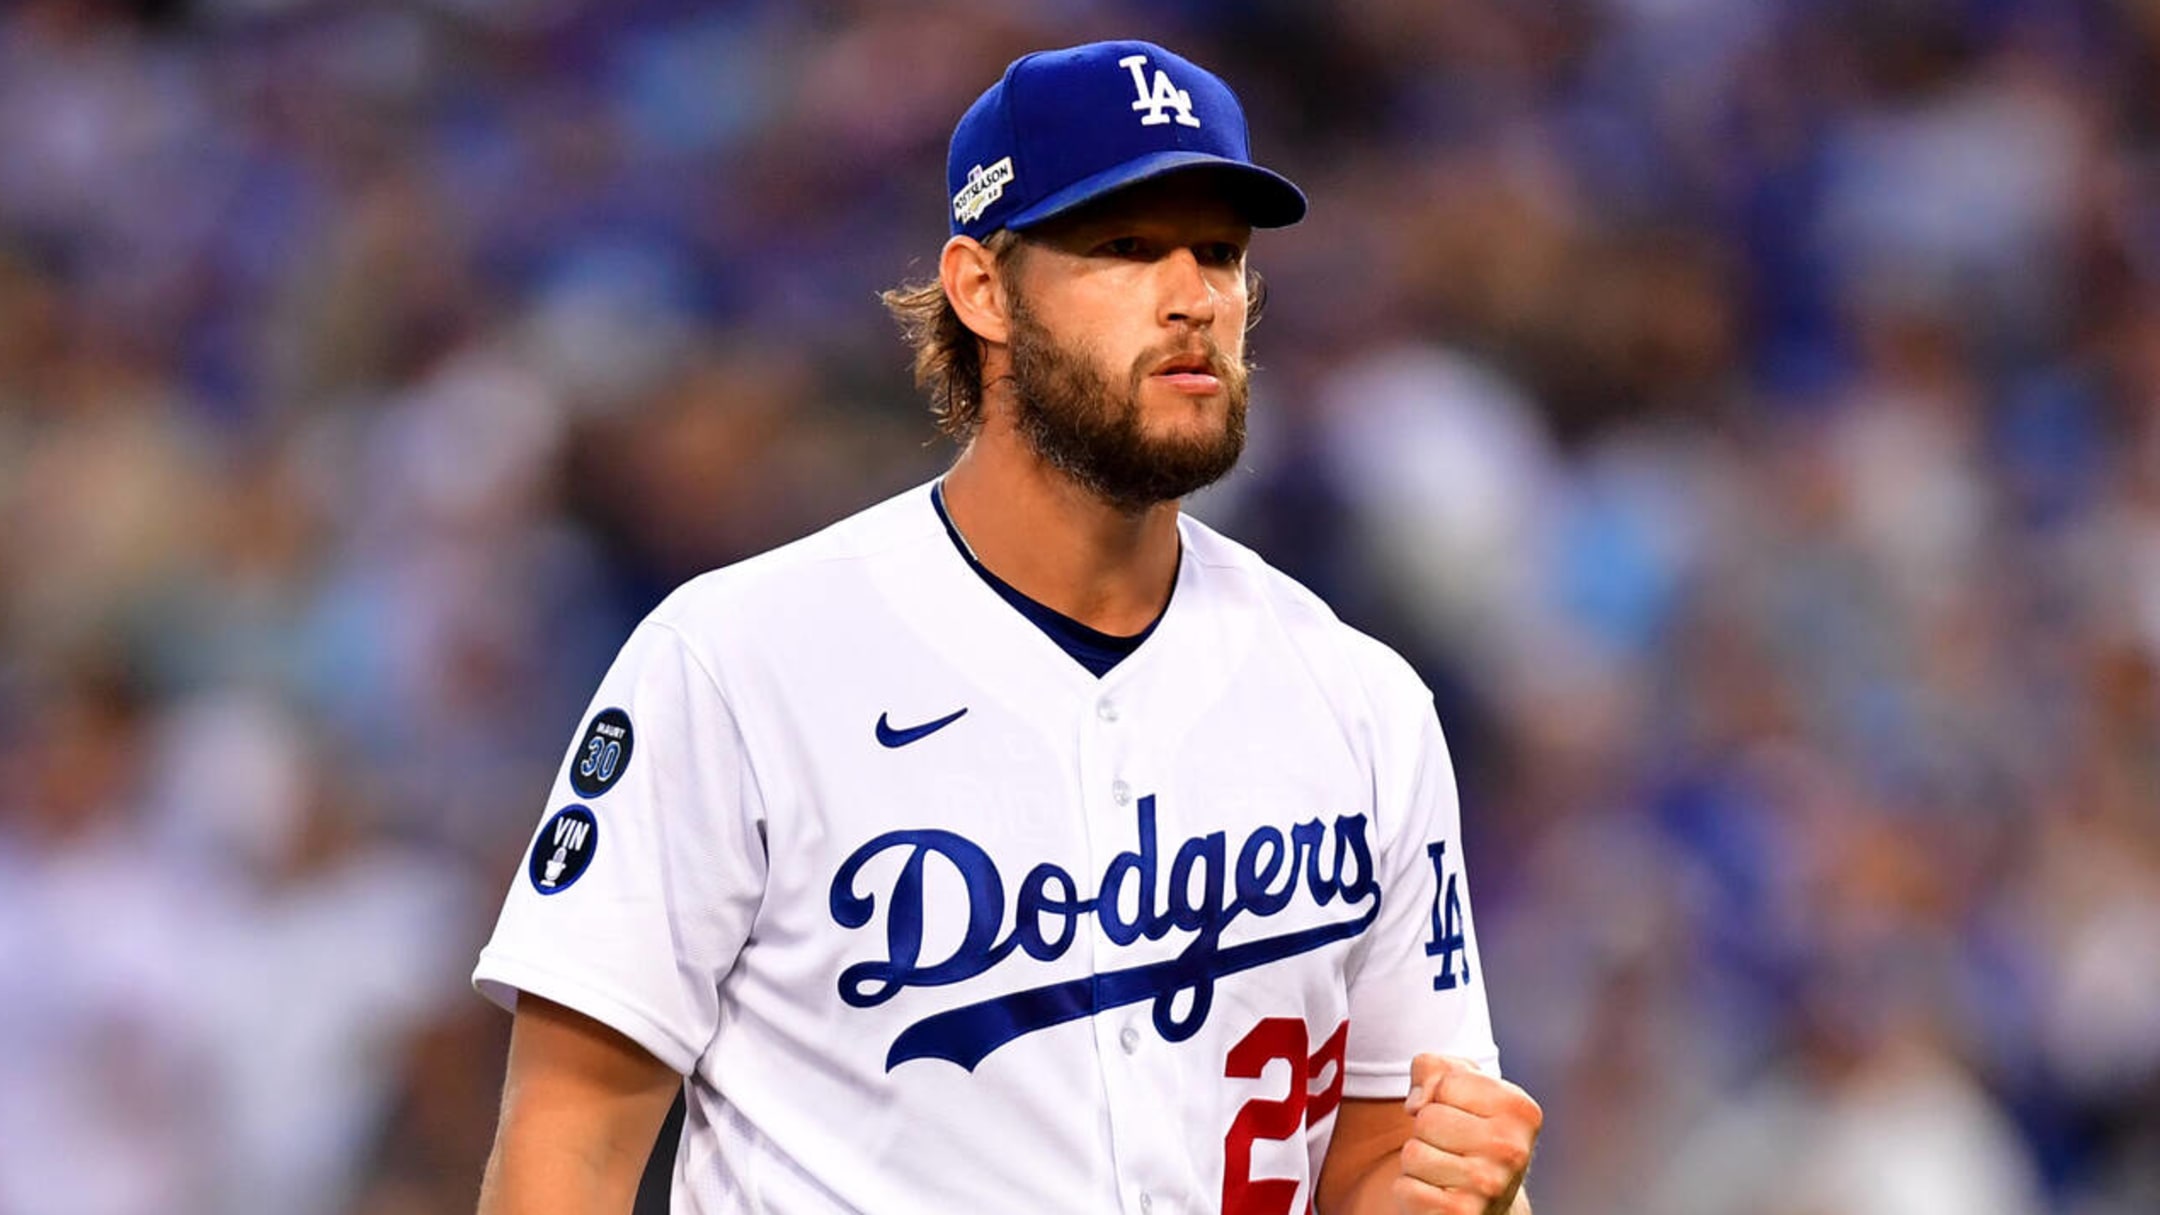 Kershaw returning to Dodgers on $20M, 1-year deal